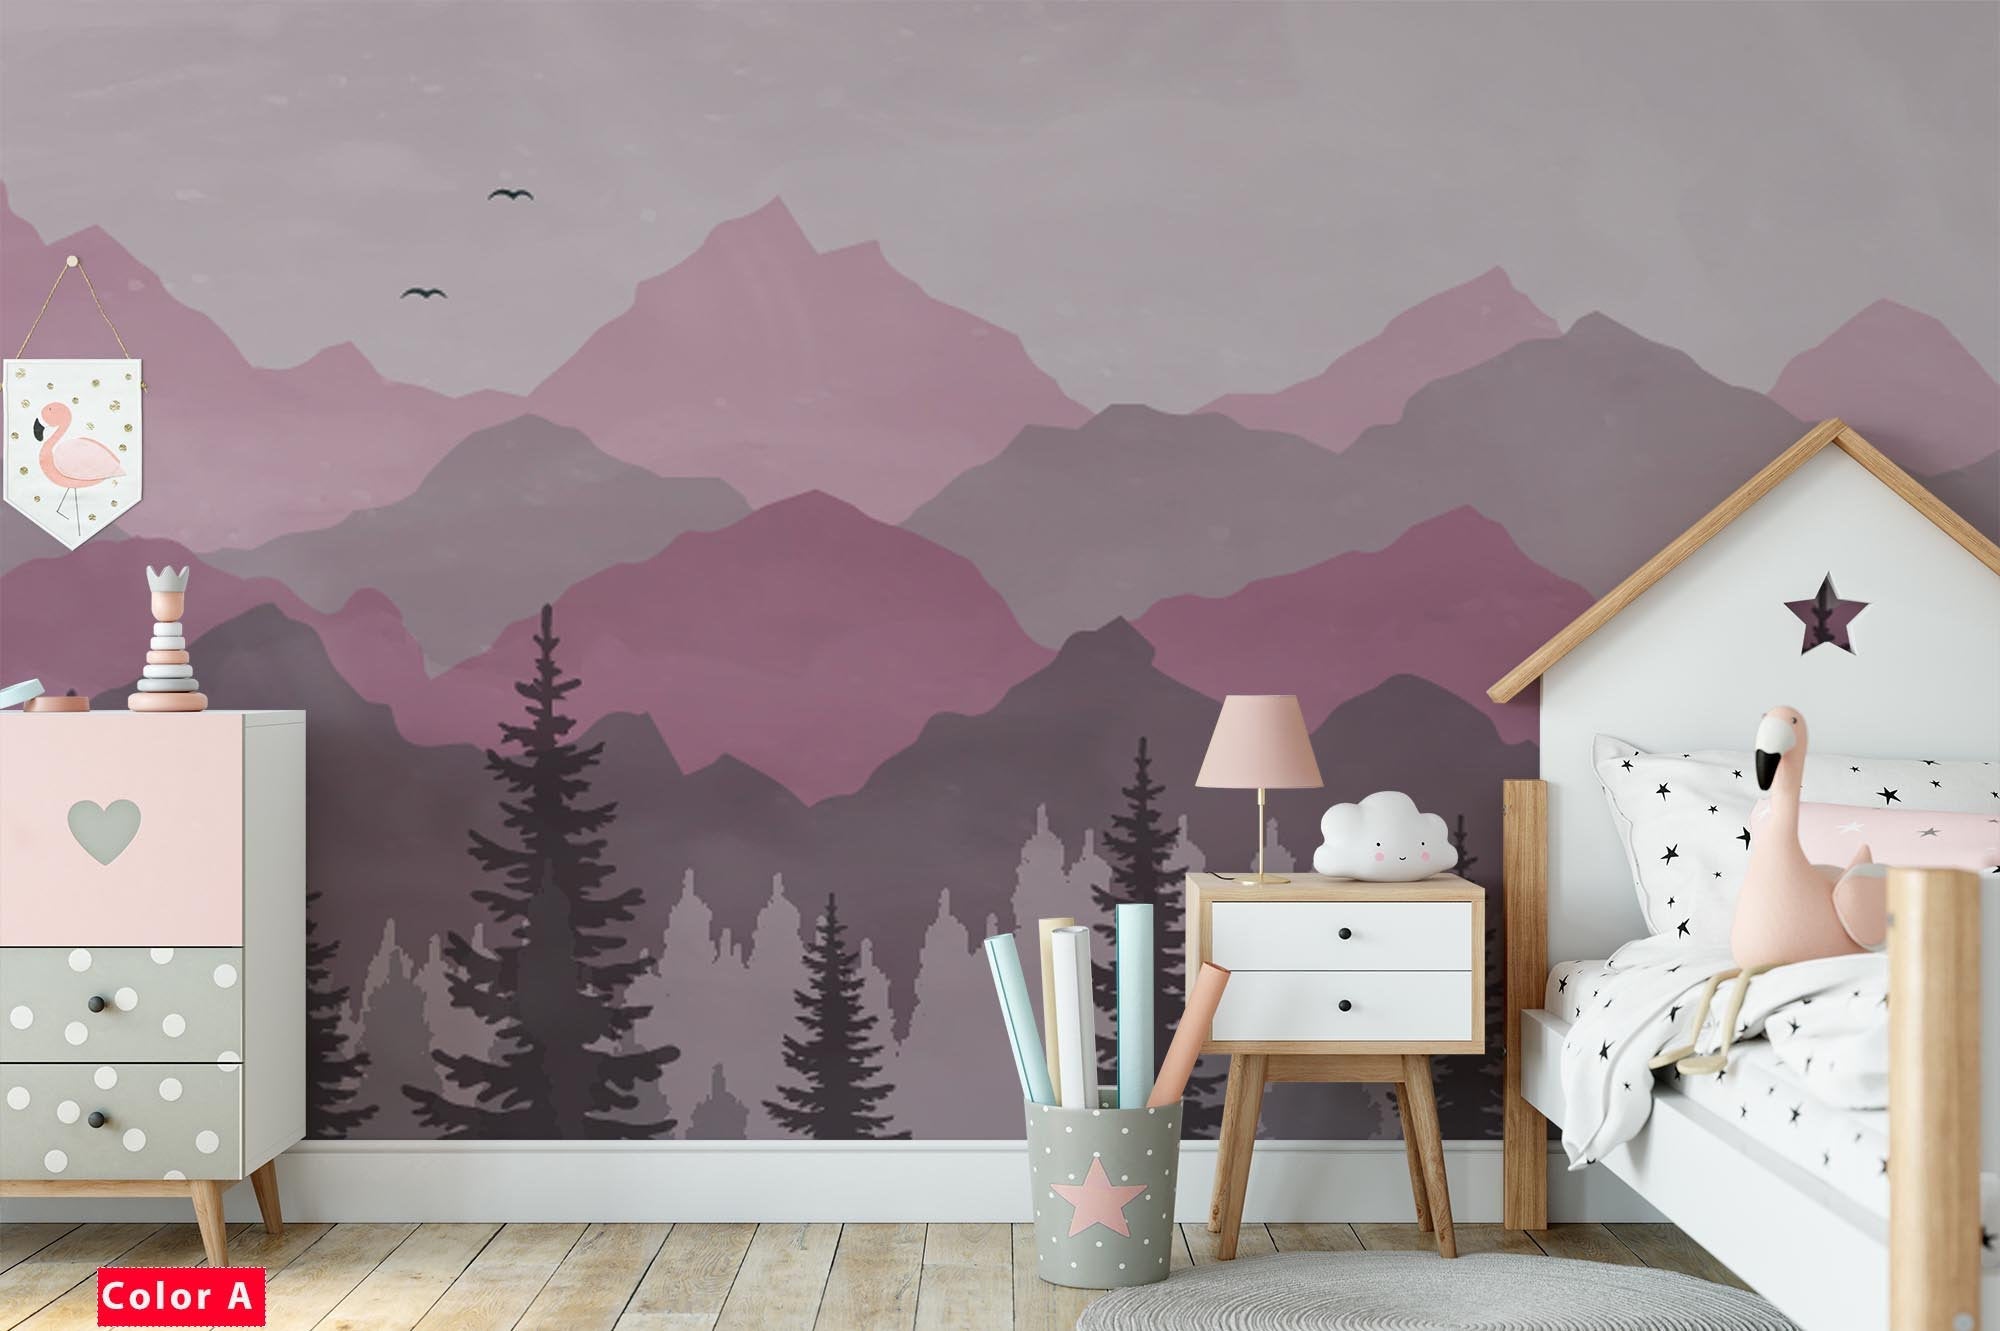 Foggy Forest Row Mountains Birds Wallpaper Self Adhesive Peel and Stick Wall Sticker Wall Decoration Minimalistic Scandinavian Removable